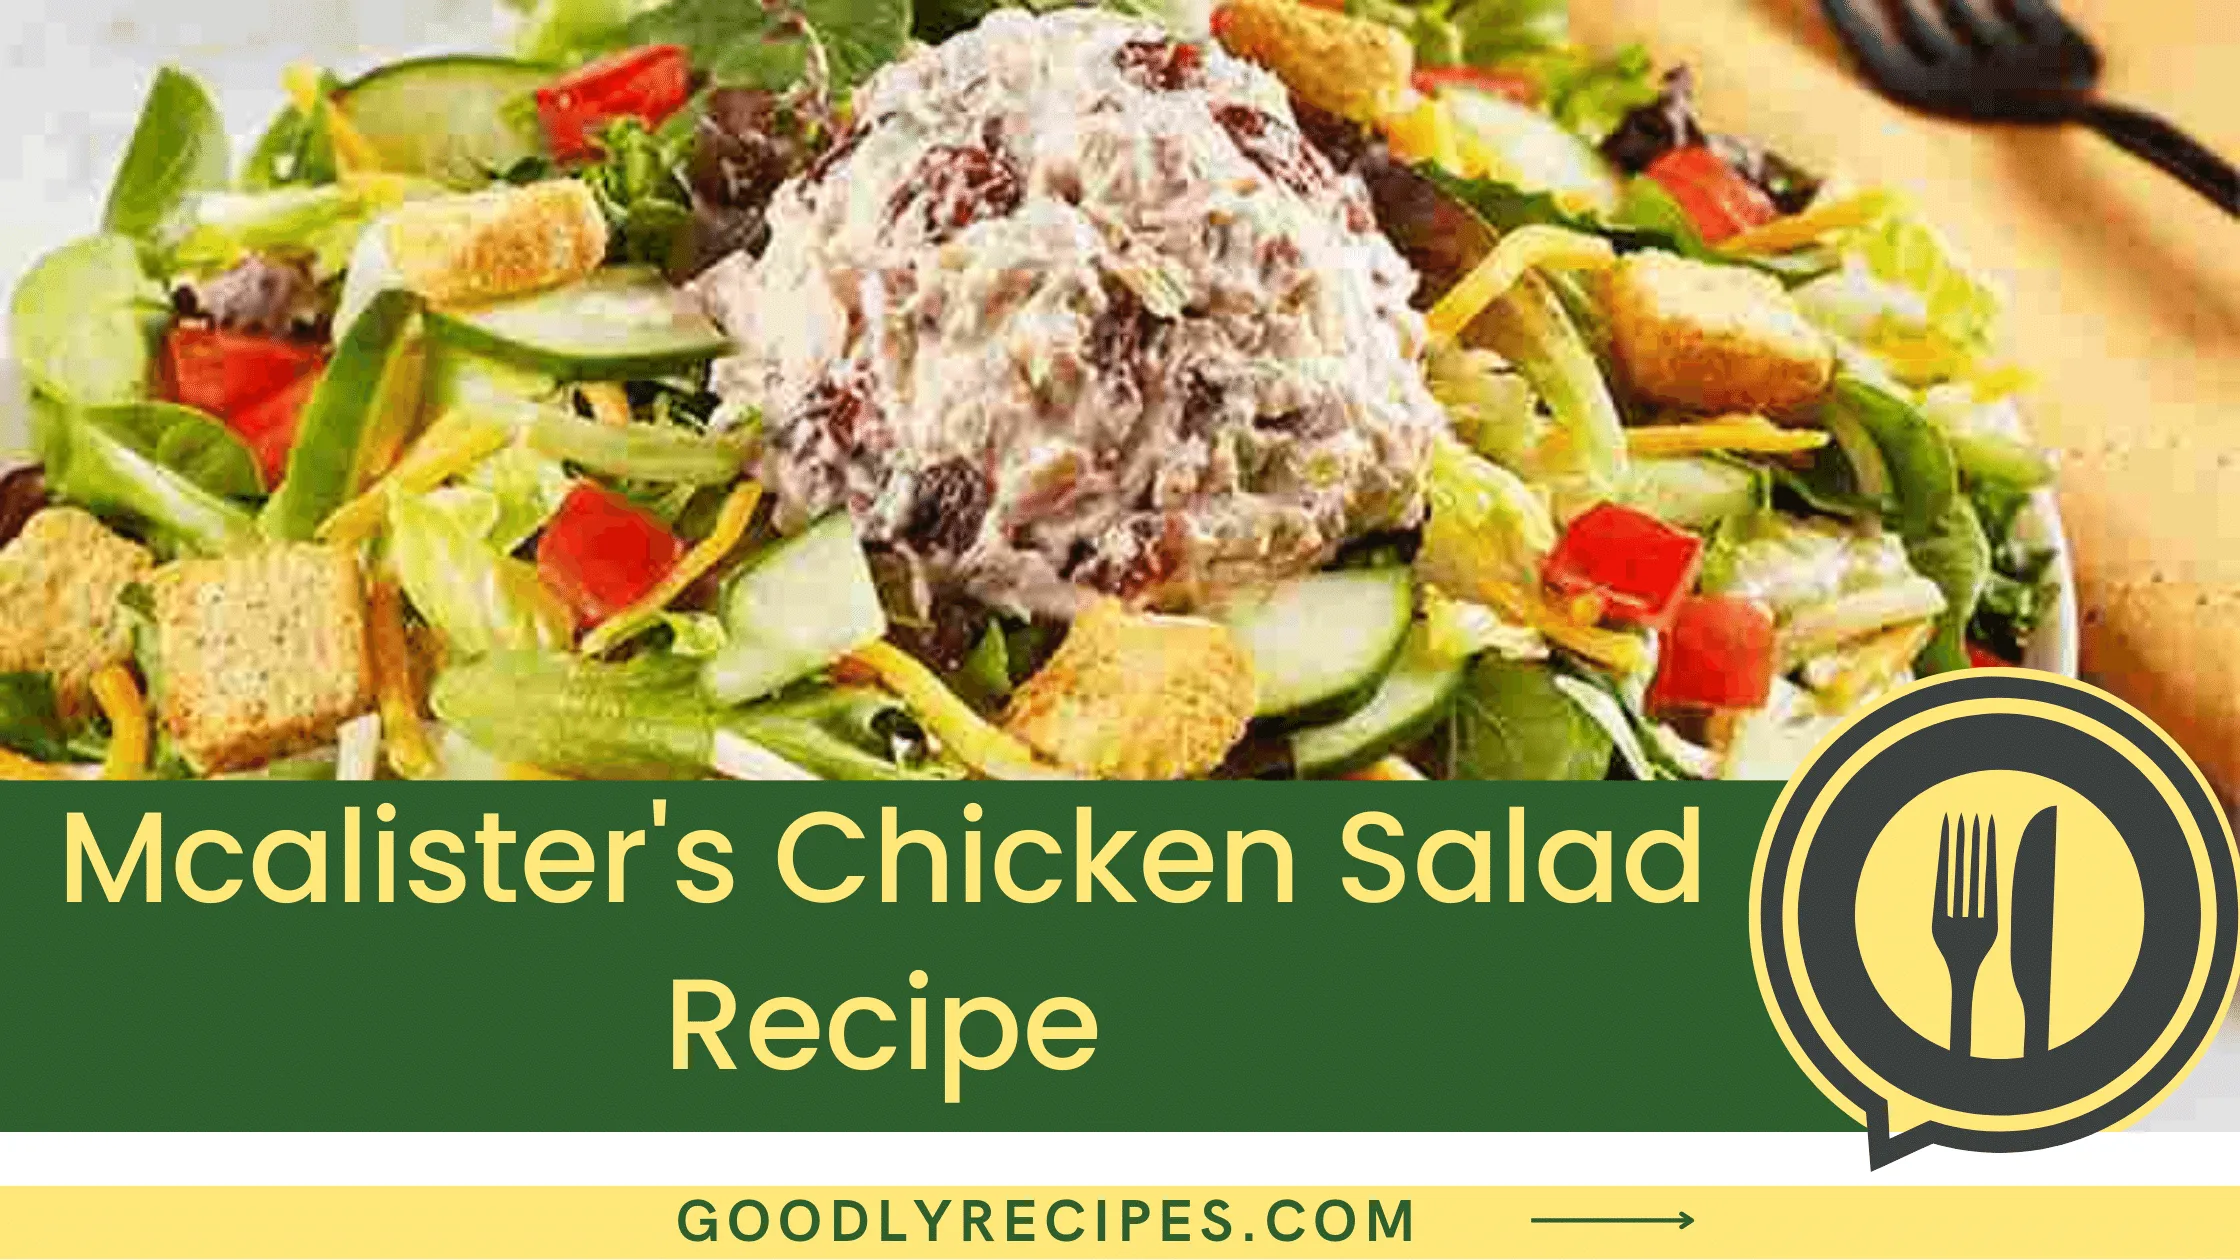 What is Mcalister’s Chicken Salad Recipe?